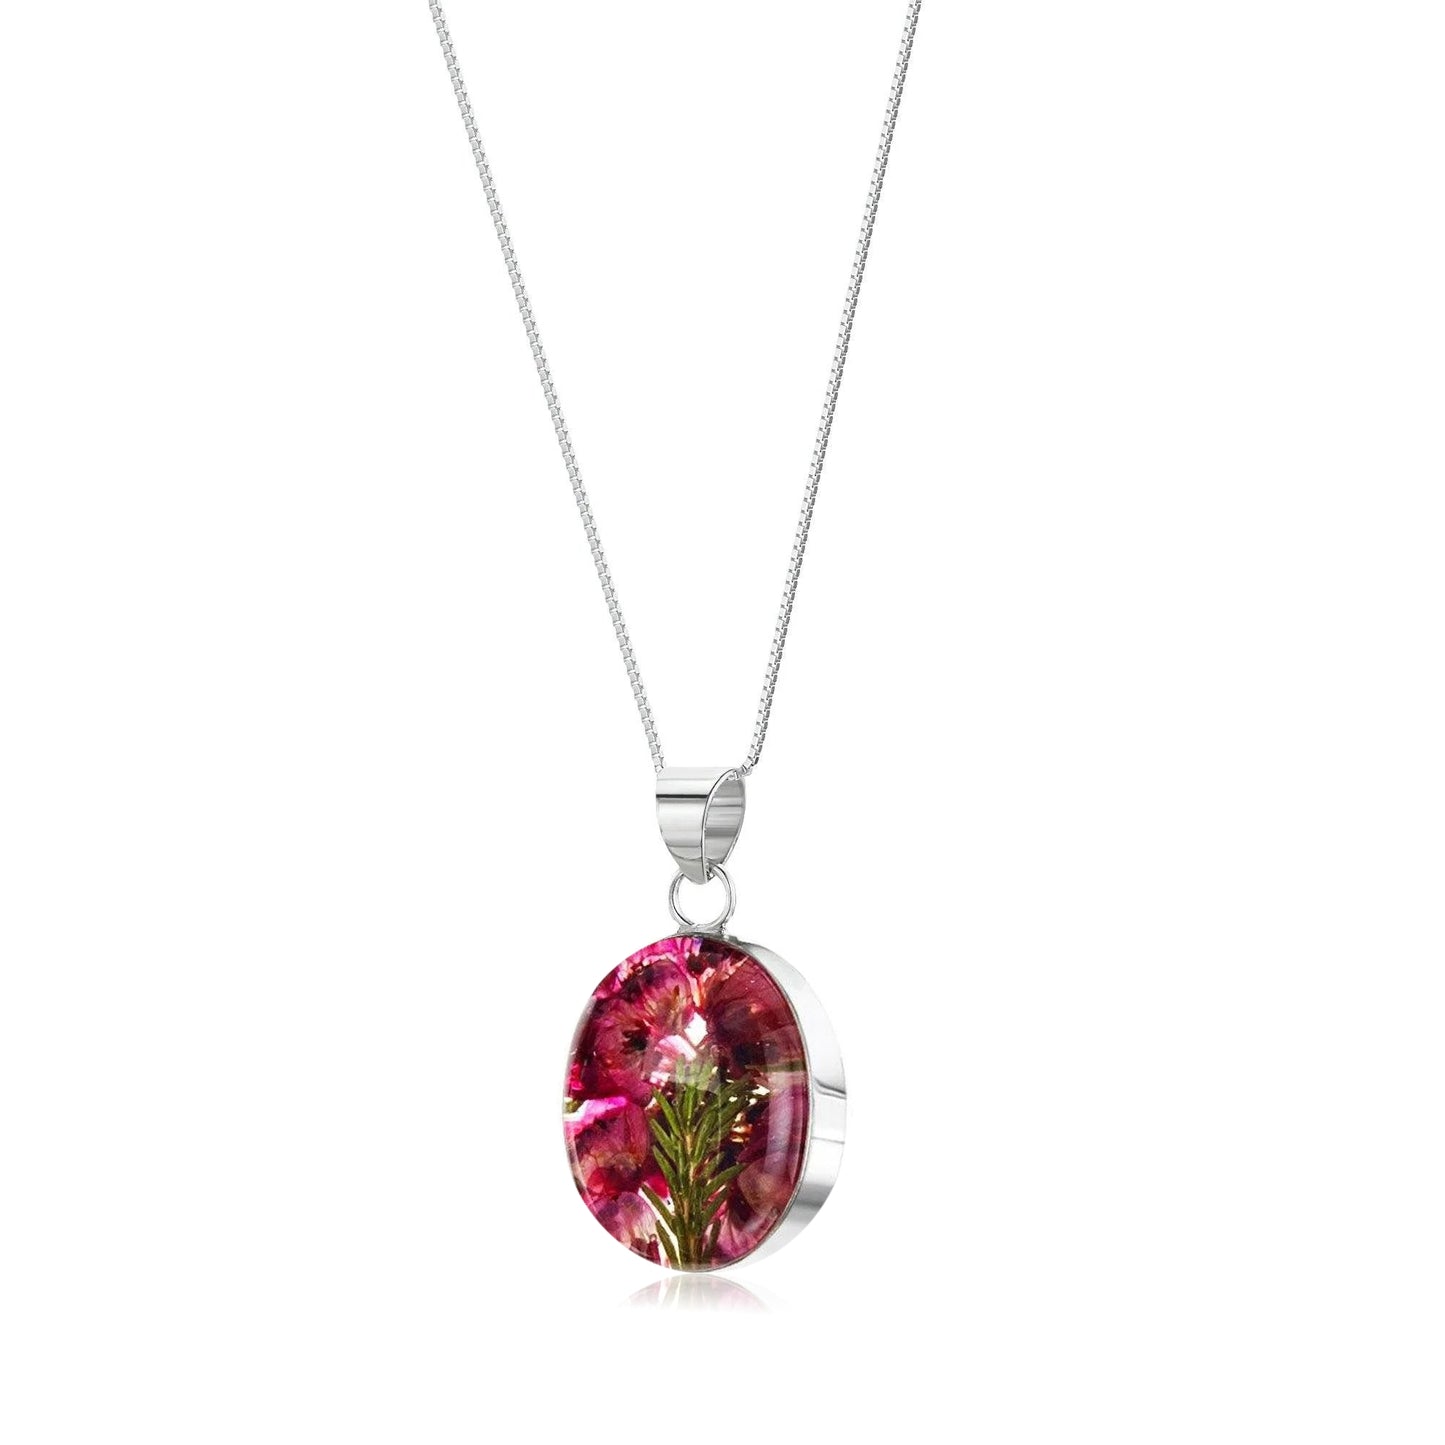 Sterling Silver Oval Pendant with real heather flowers & box chain